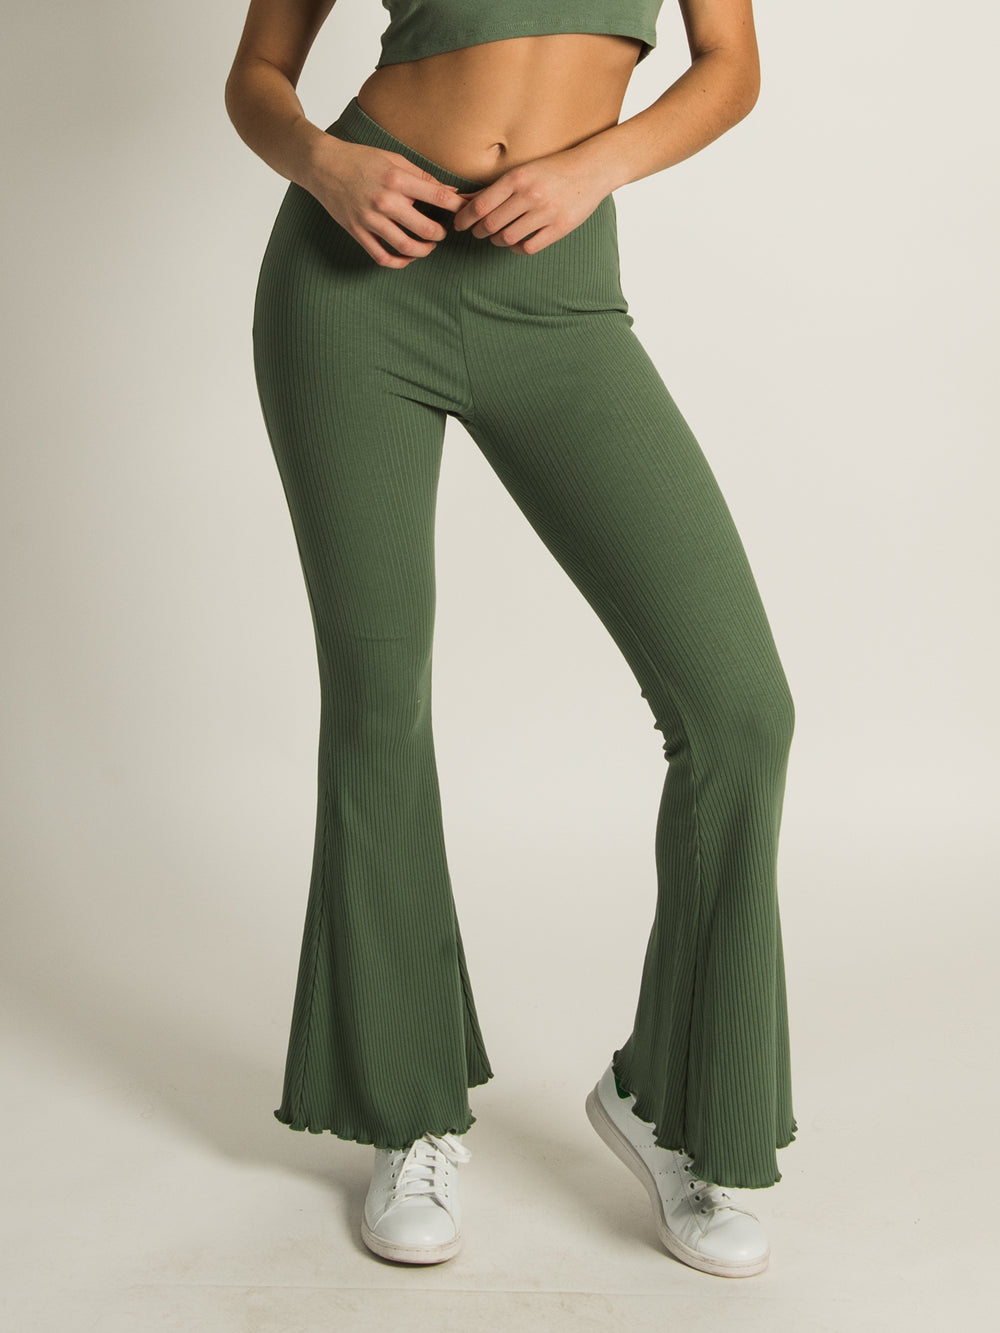 HARLOW HIGH RISE FLARE PANTS - CLEARANCE